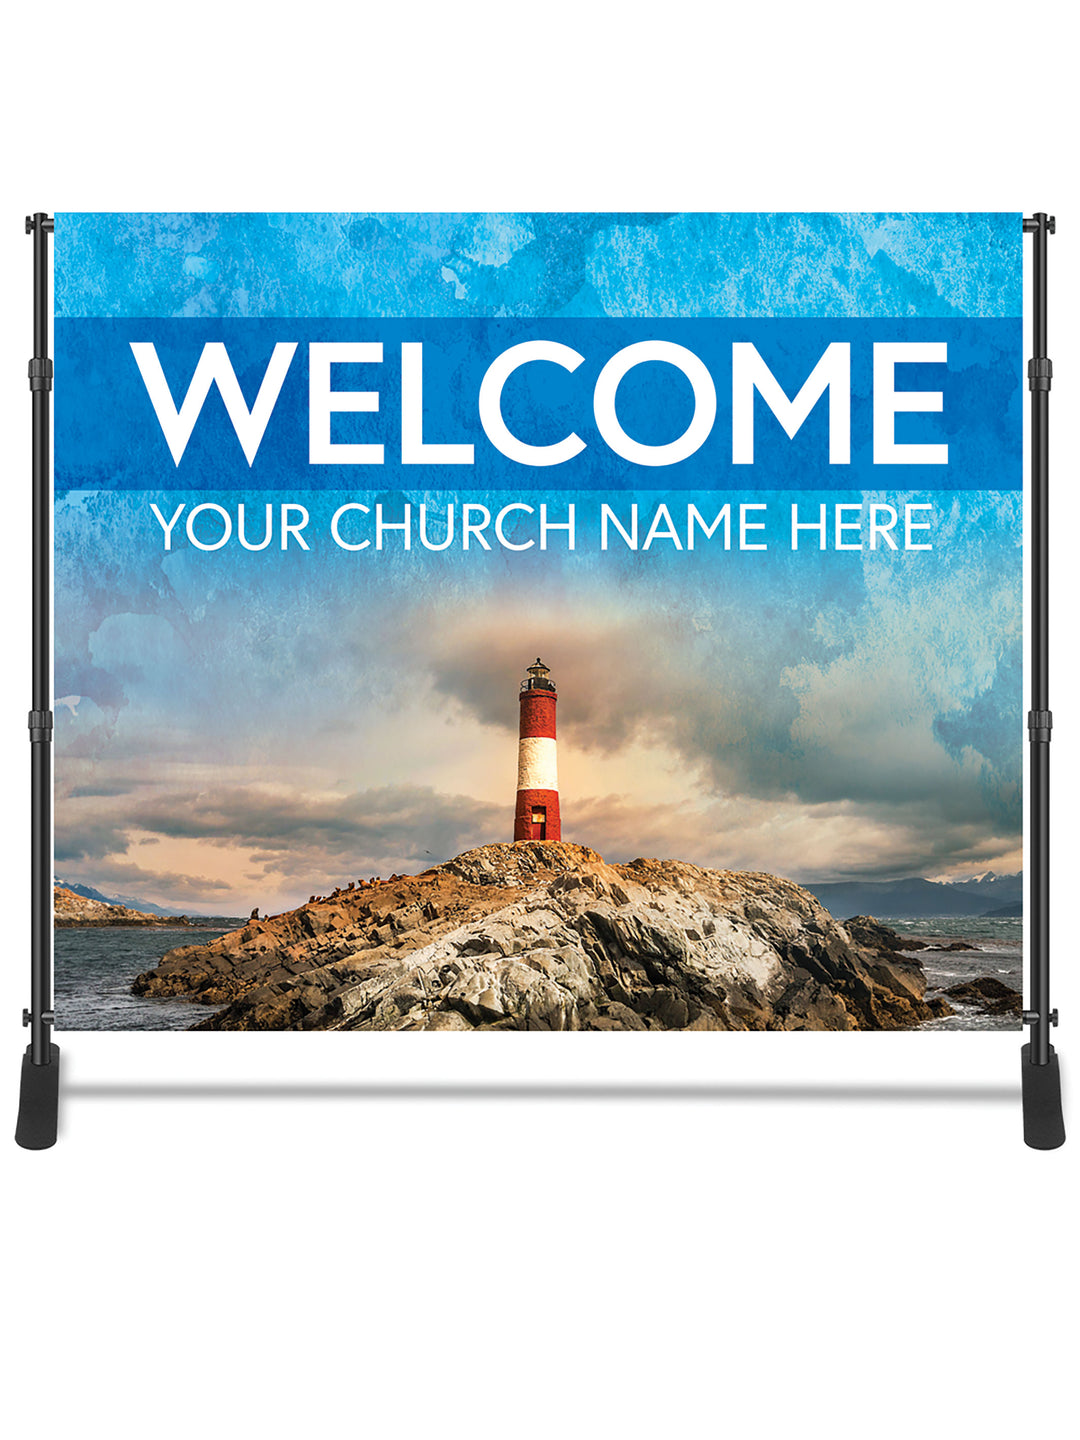 Enhancing Your Church's Visual Branding With Backdrop Banners: A Guide